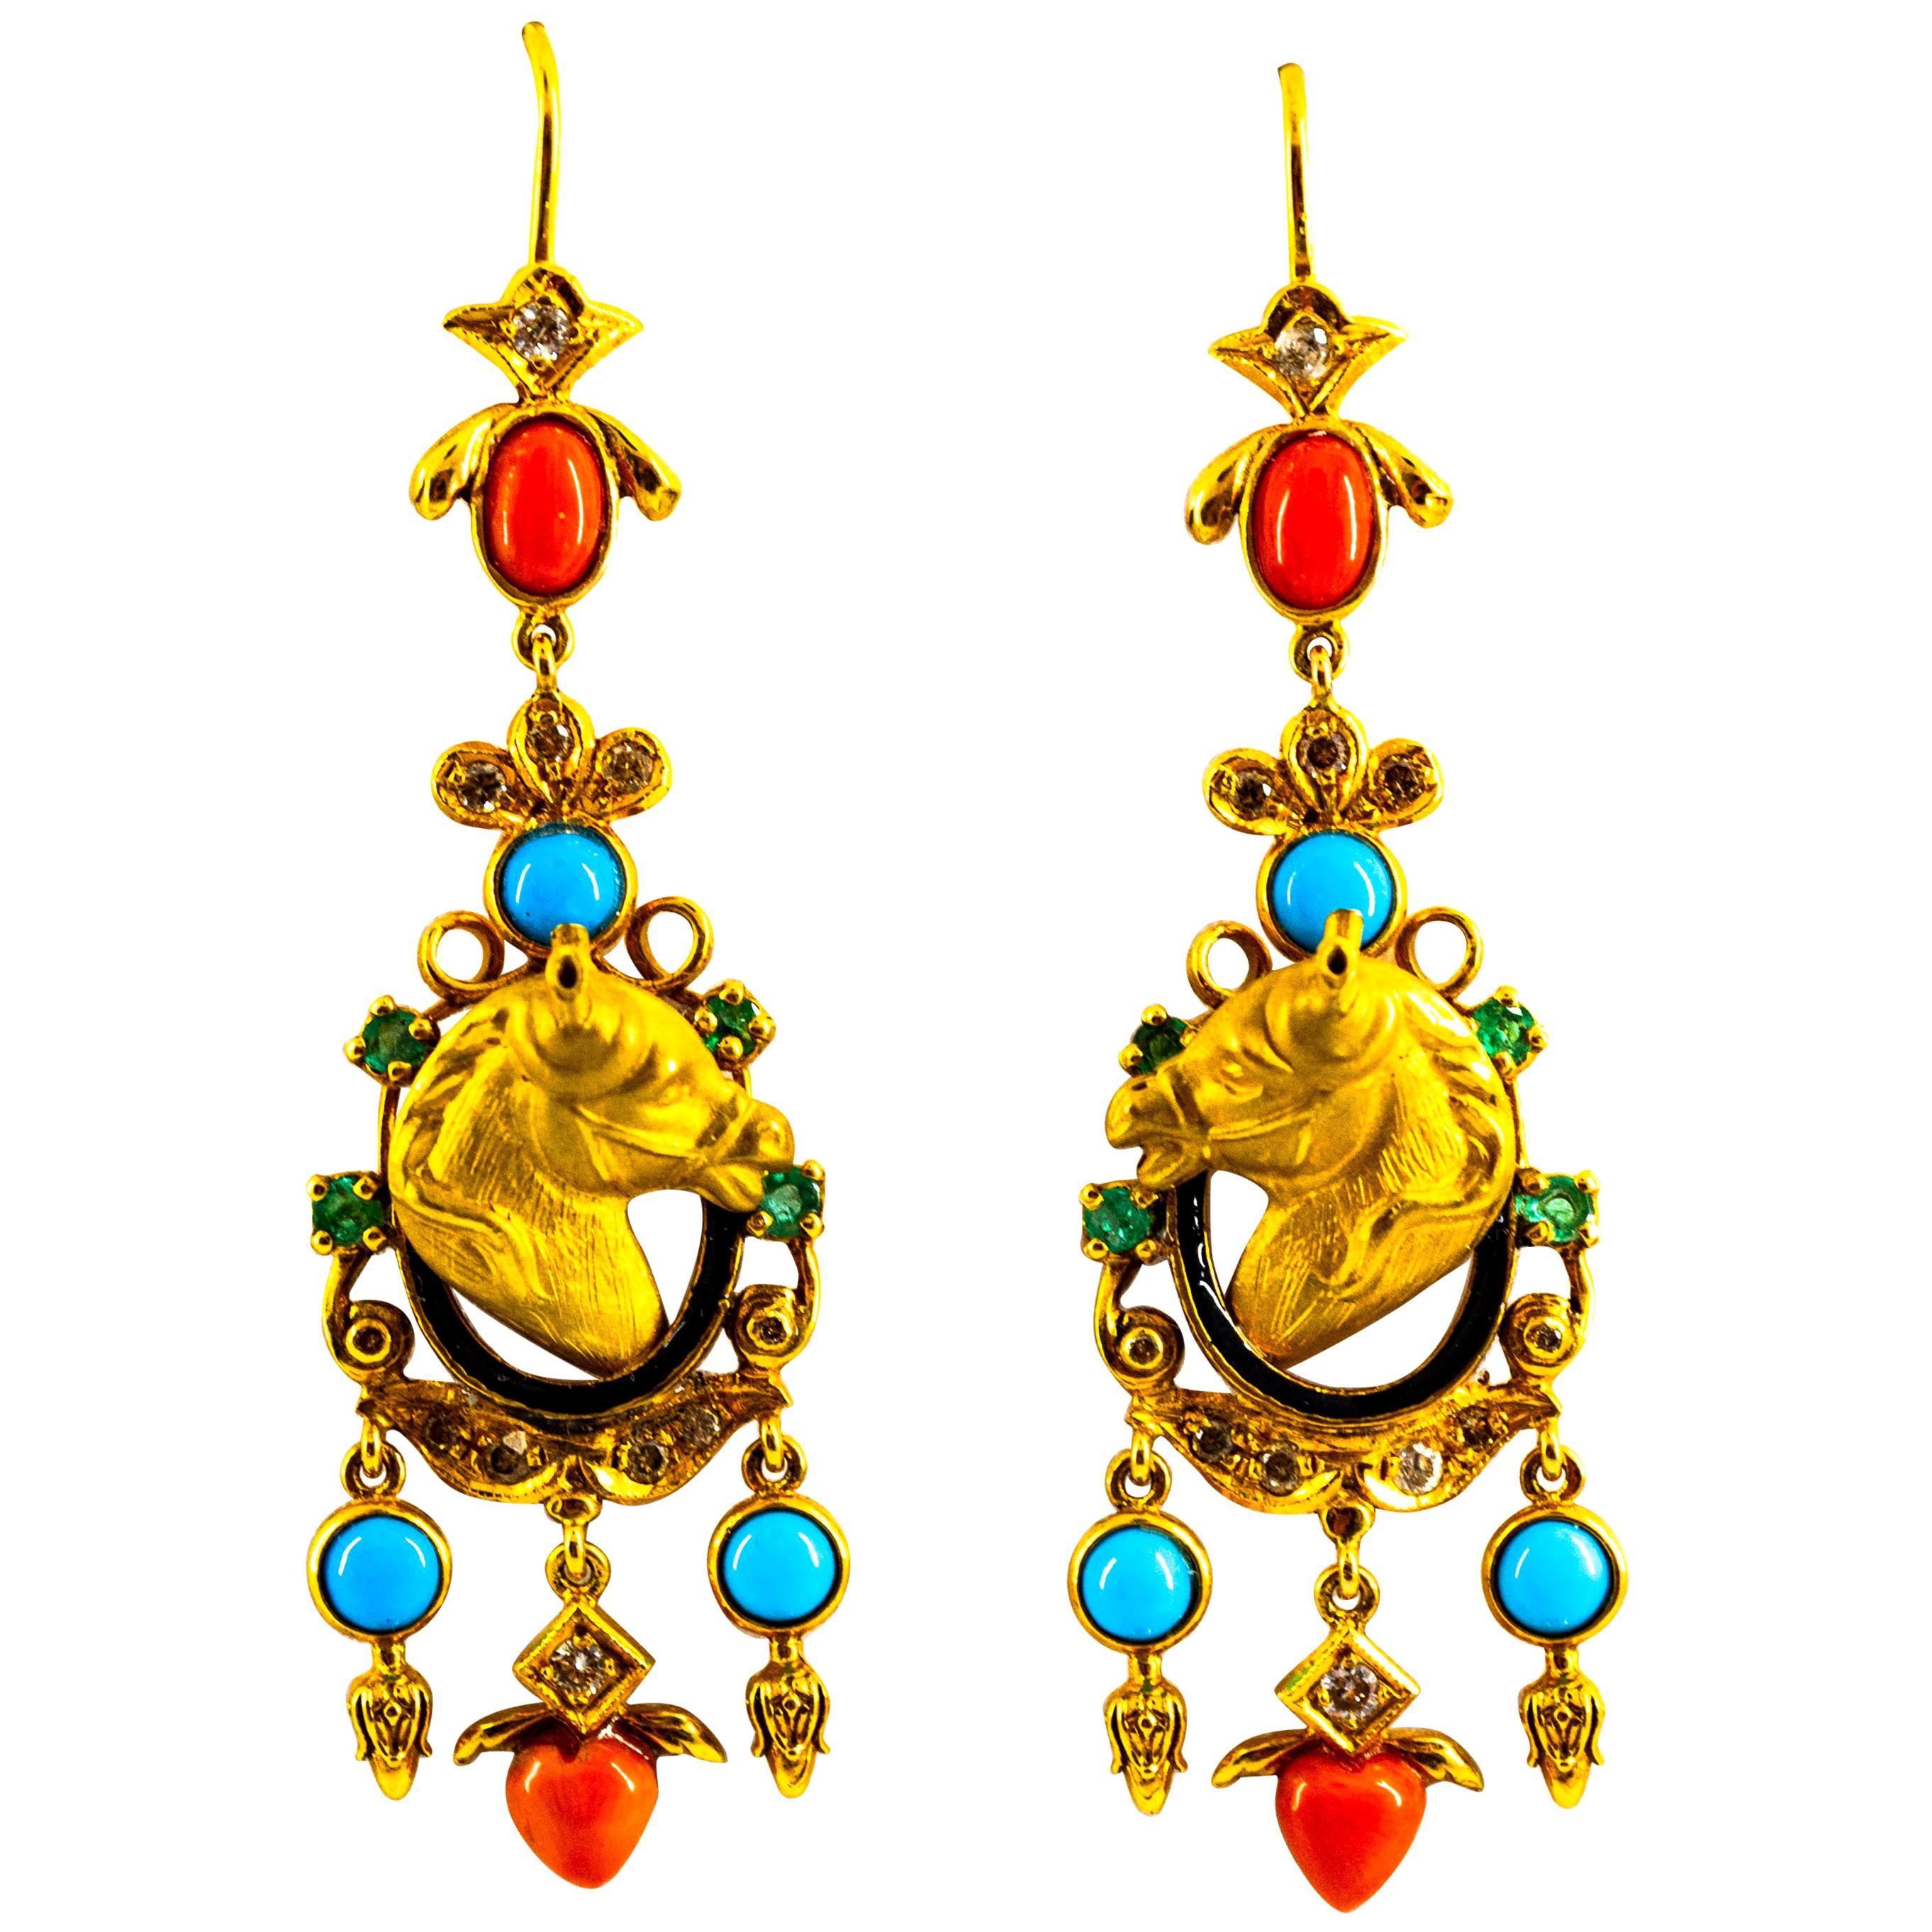 0.70 Carat White Diamond Emerald Coral Turquoise Yellow Gold Horse Drop Earrings